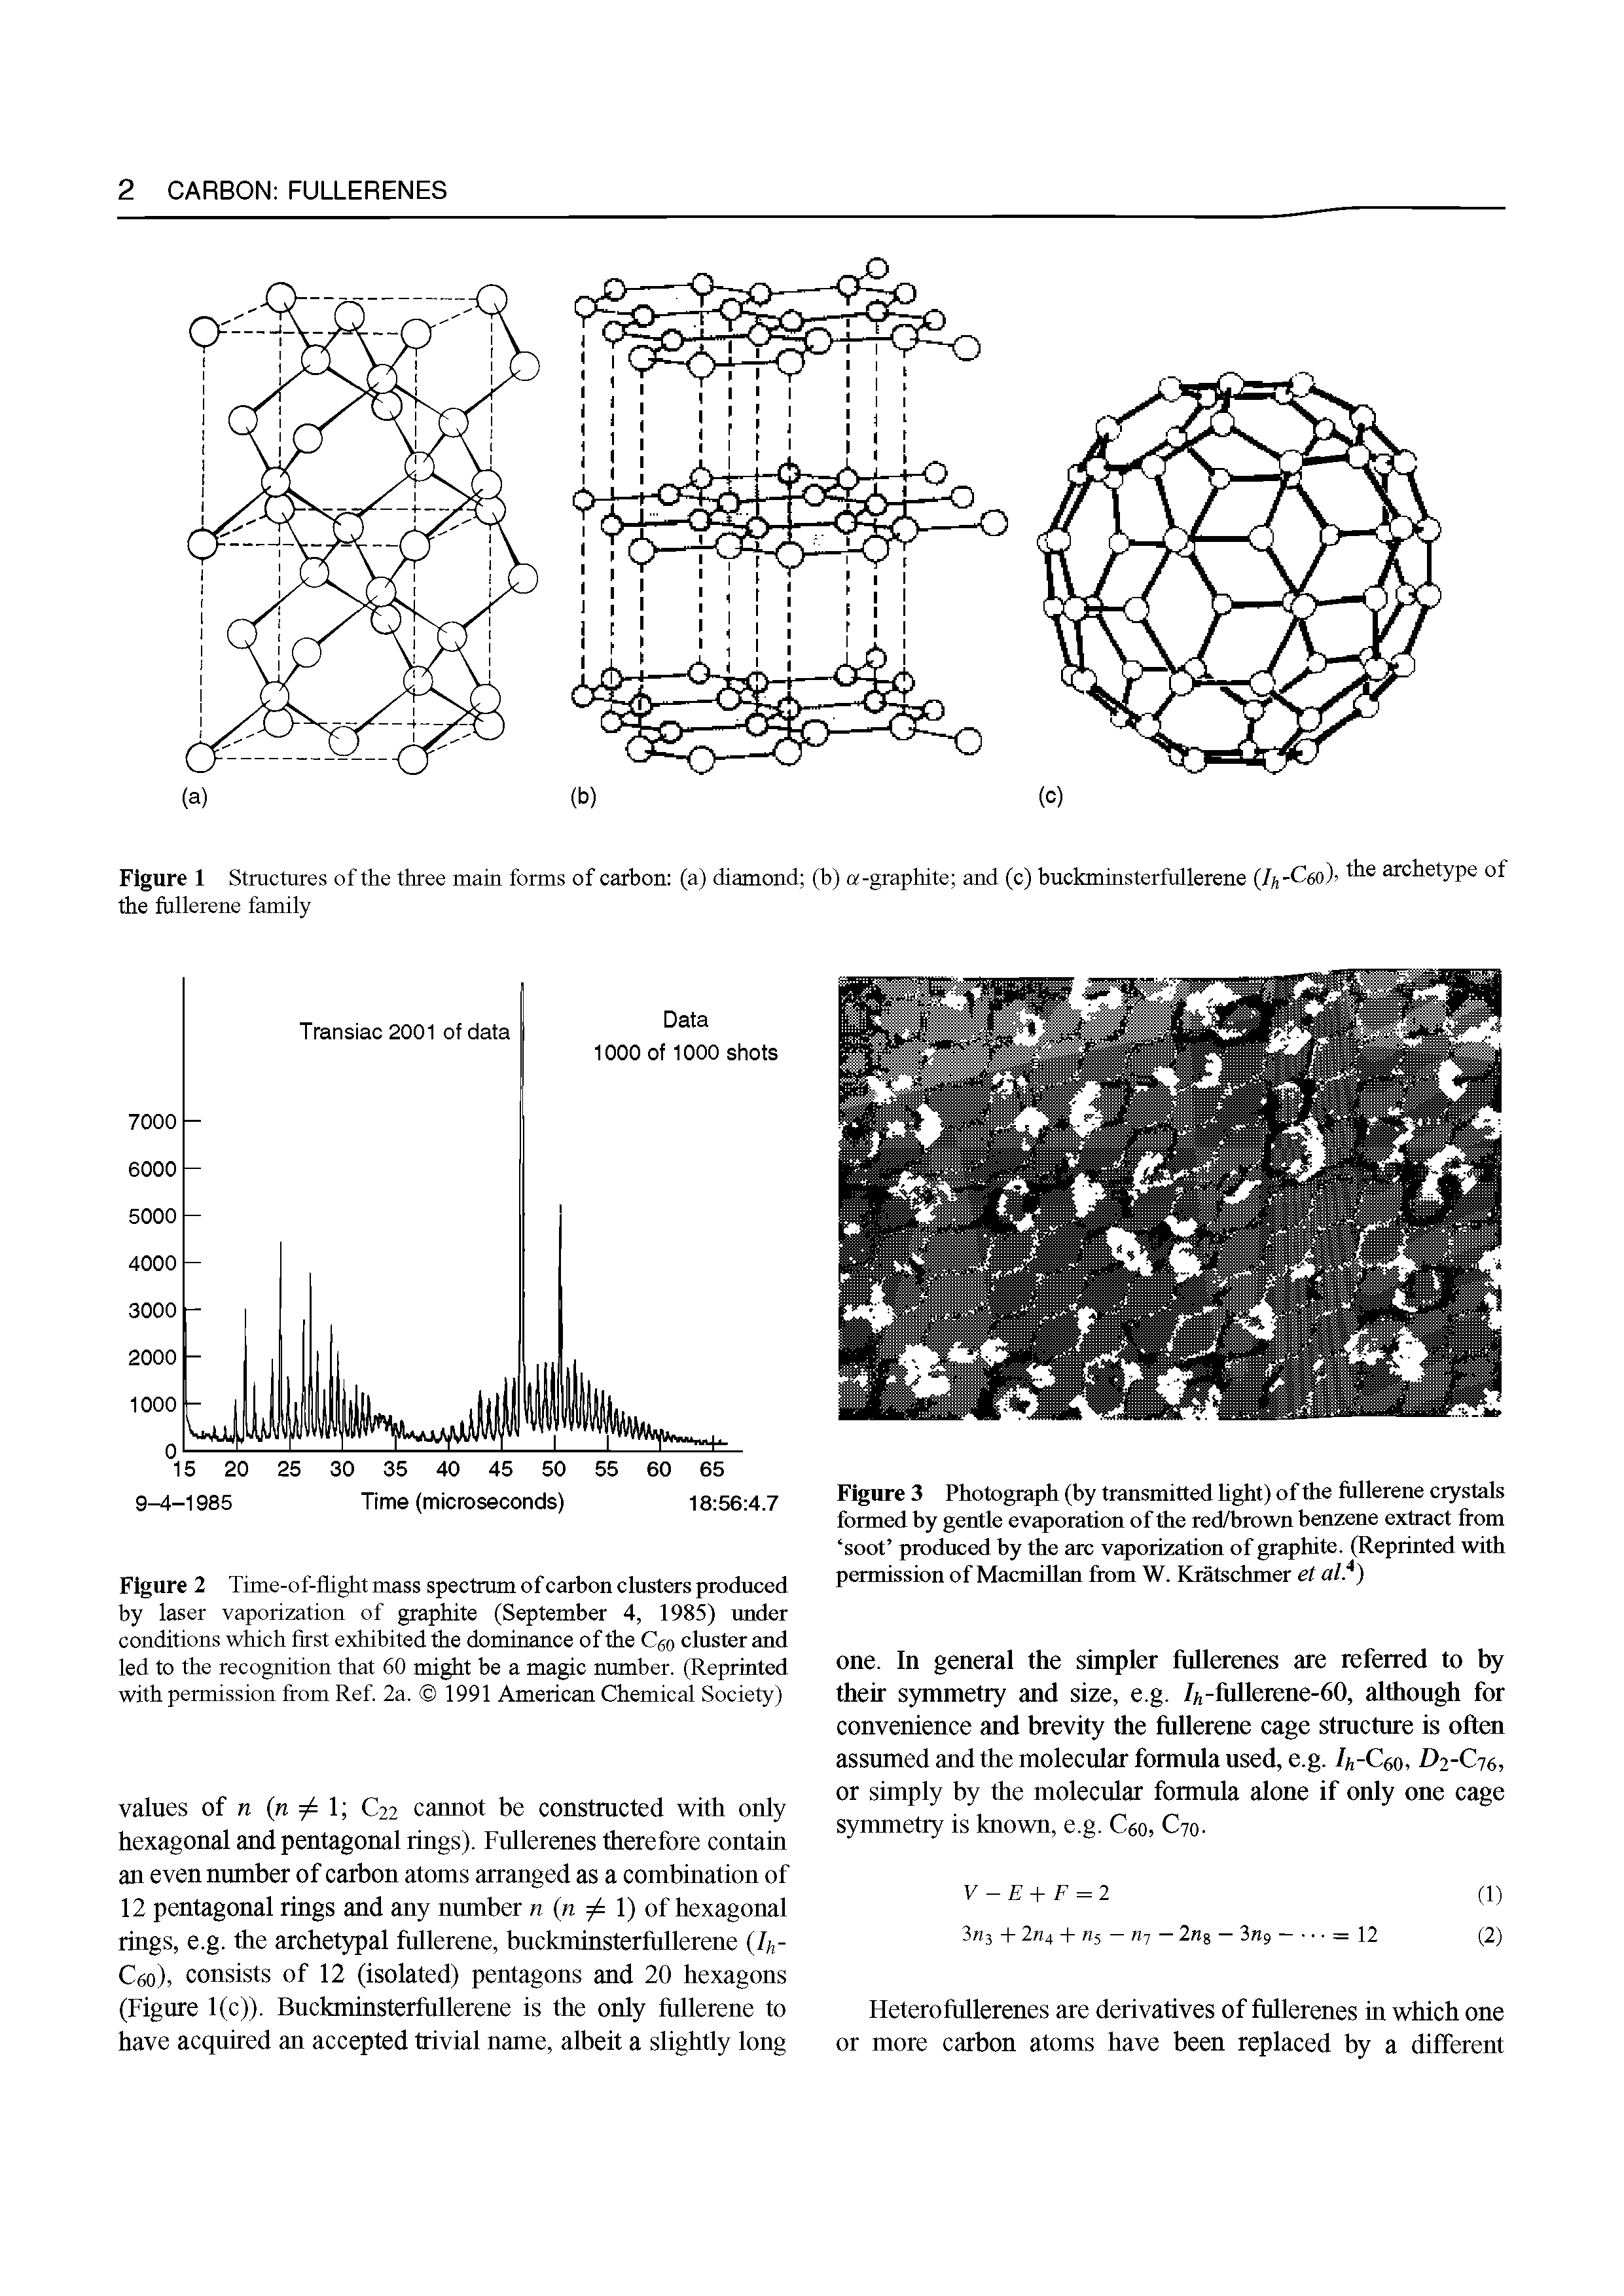 Figure 2 Time-of-flight mass spectrum of carbon clusters produced by laser vaporization of graphite (September 4, 1985) imder conditions which first exhibited the dominance of the Cgo cluster and led to the recognition that 60 might be a magic number. (Reprinted with permission from Ref 2a. 1991 American Chemical Society)...